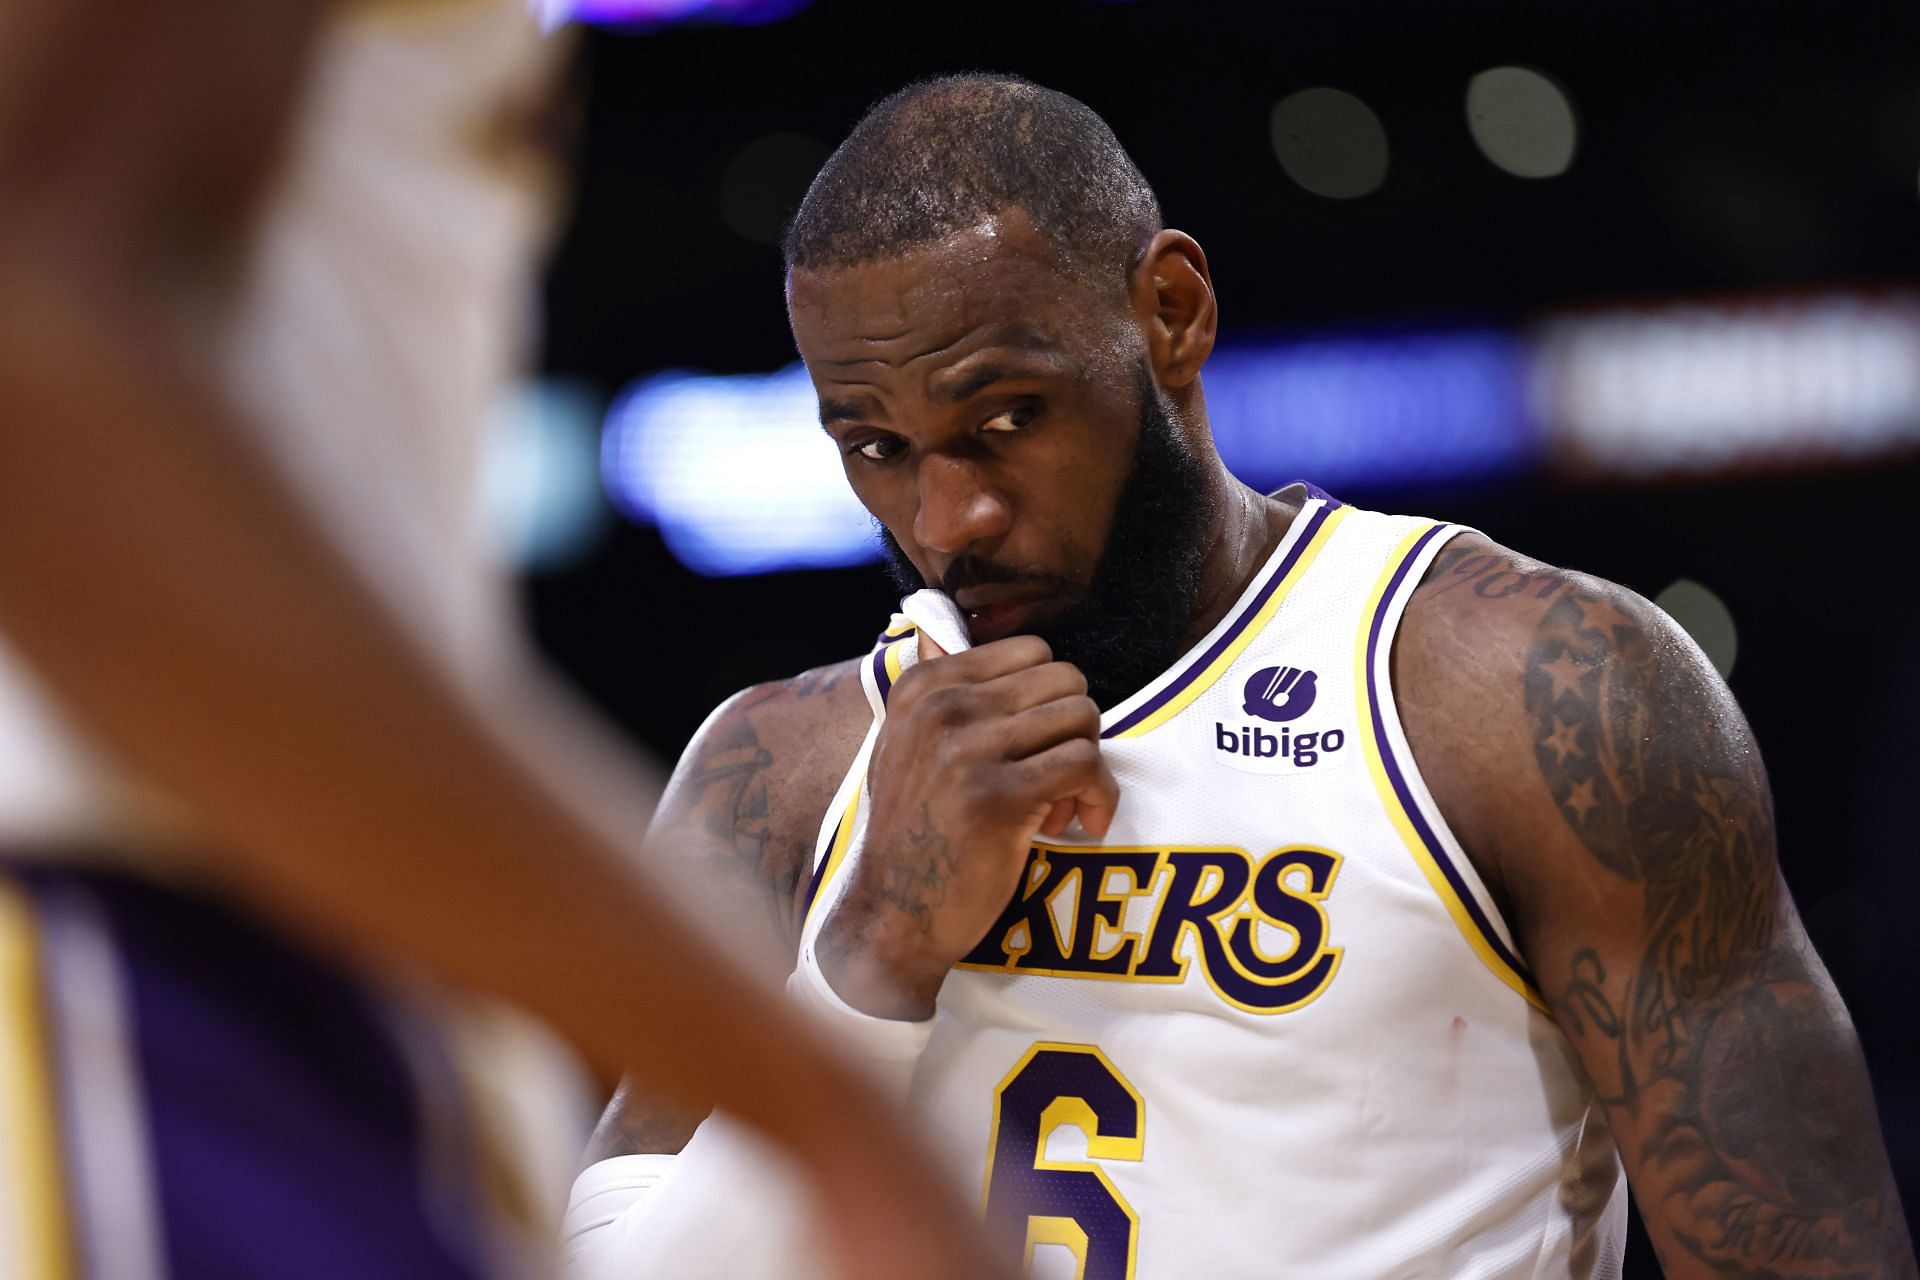 LeBron James of the LA Lakers reacts during a game